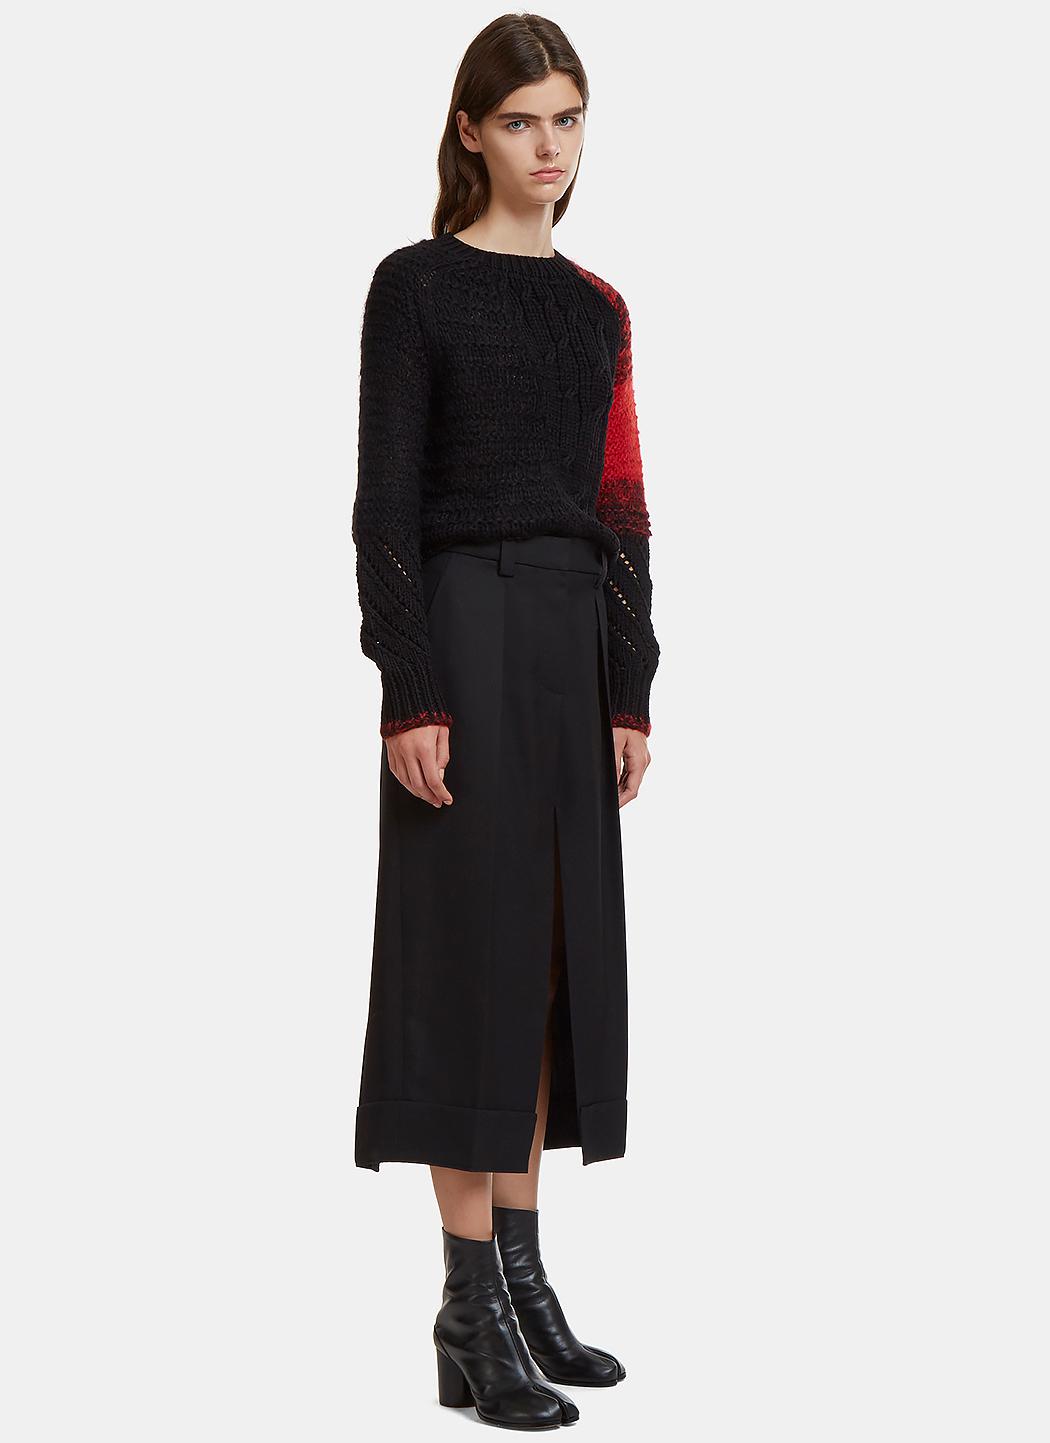 Lyst - Helmut Lang Patchwork Knit Sweater In Red And Black in Red